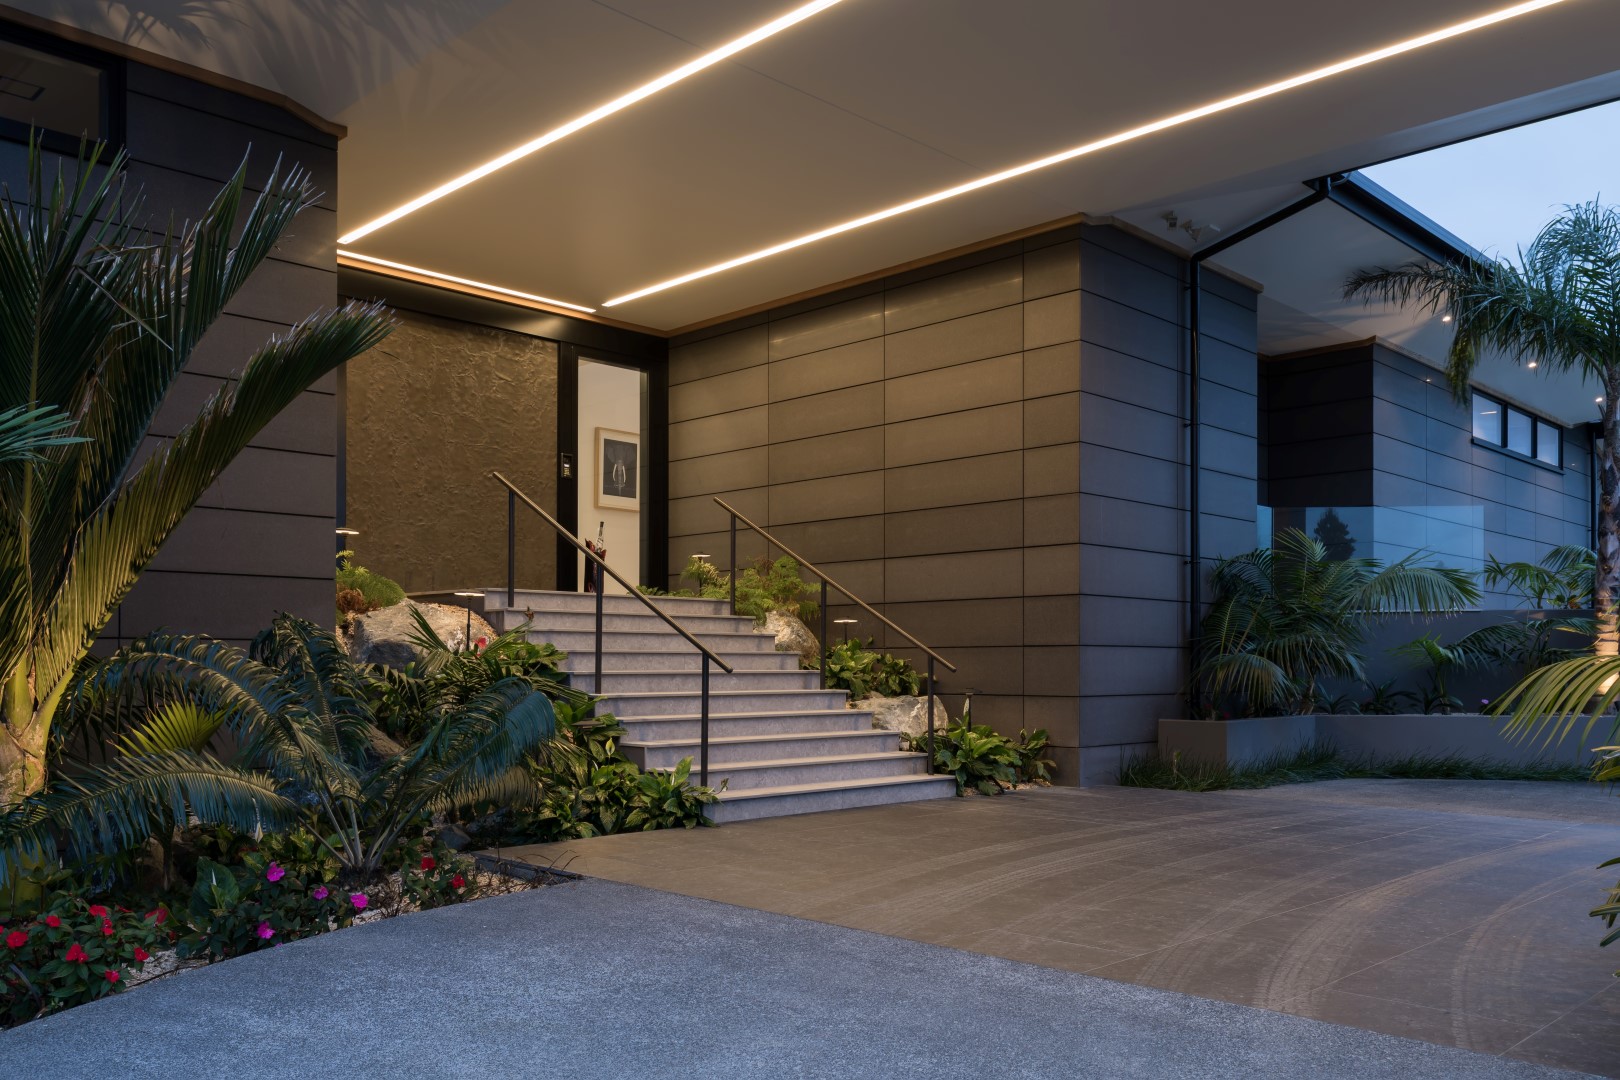 portico-tiles-entry-steps-stairs-front-door-landscaping-arcline-architecture-lighting